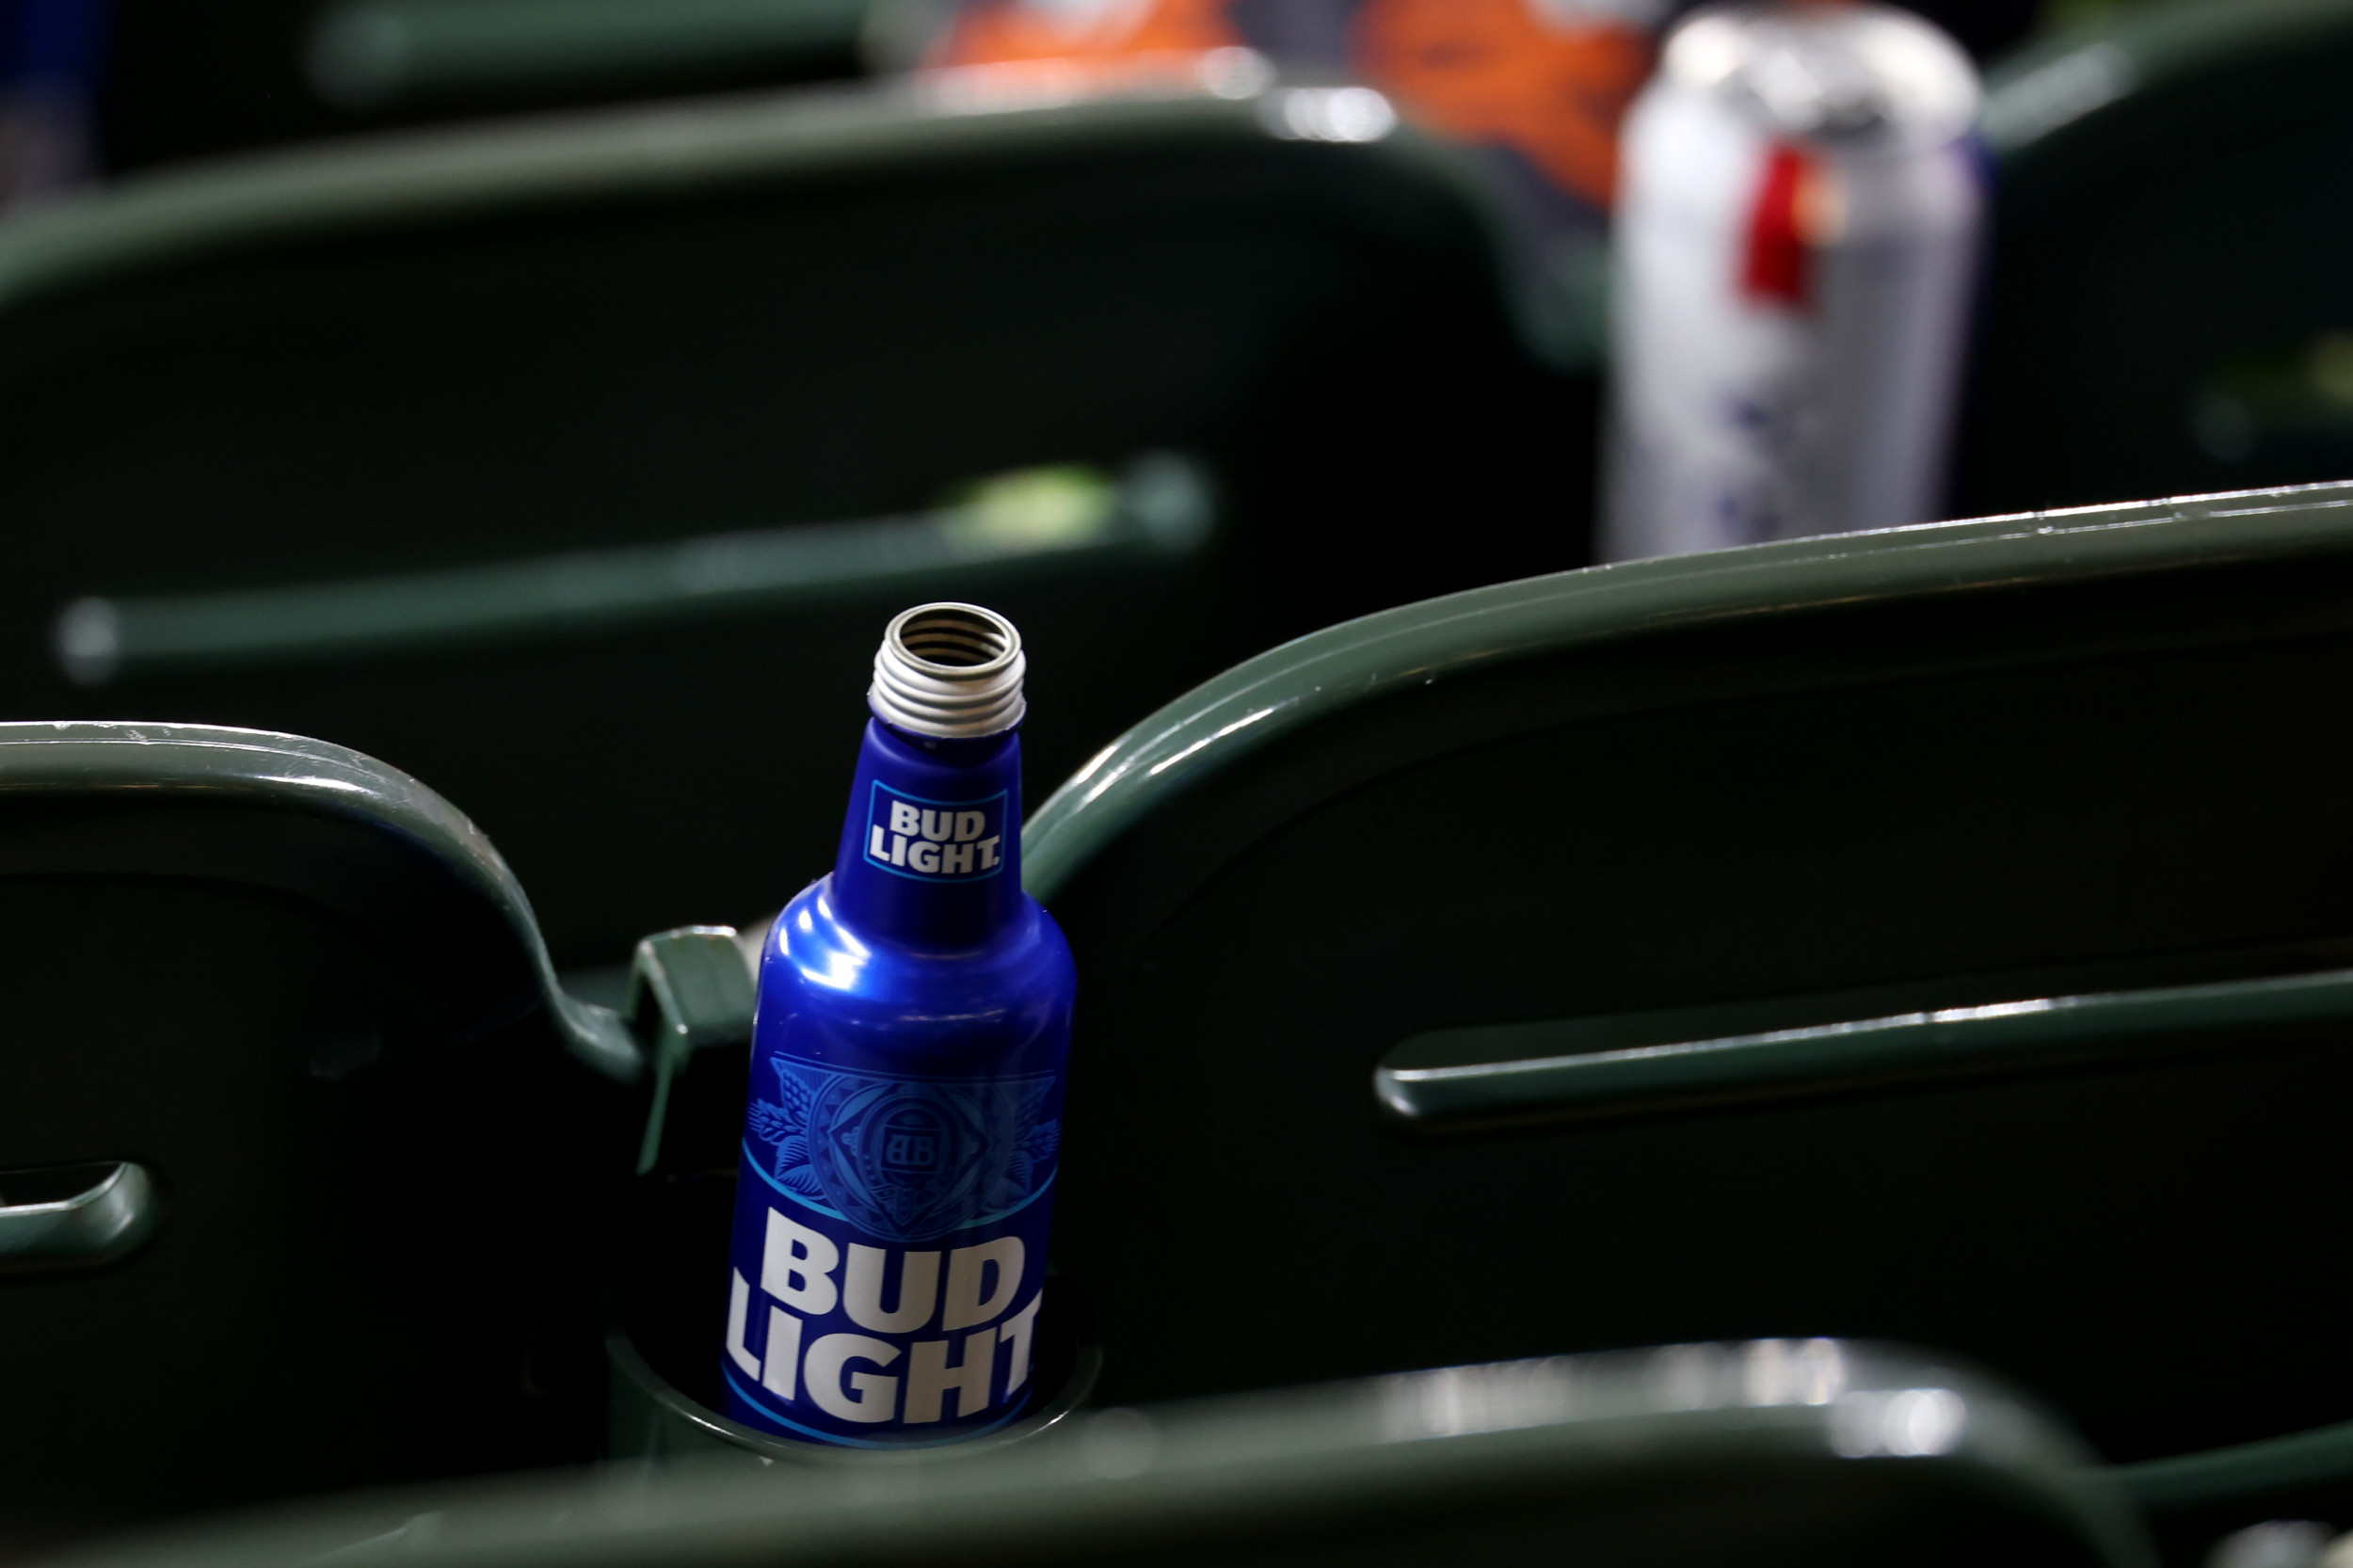 Bud Light makers won’t say whether “woke” ad execs have been let go